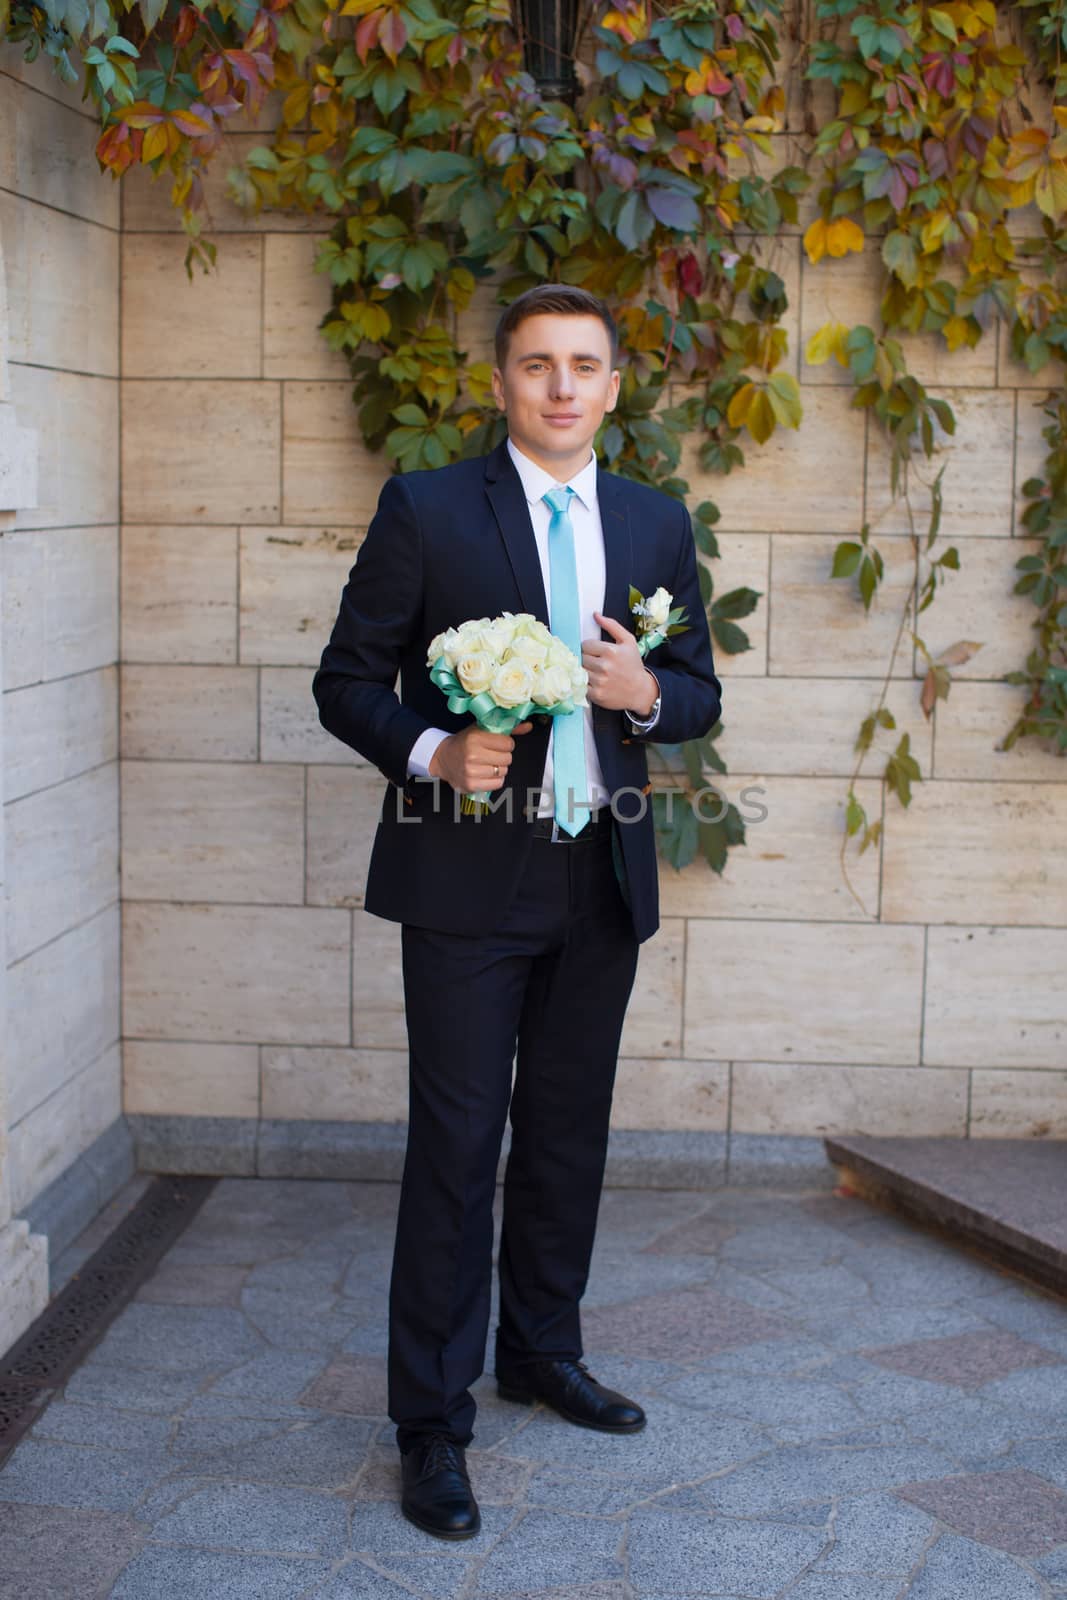 Groom in a stylish suit against a brick wall background by lanser314